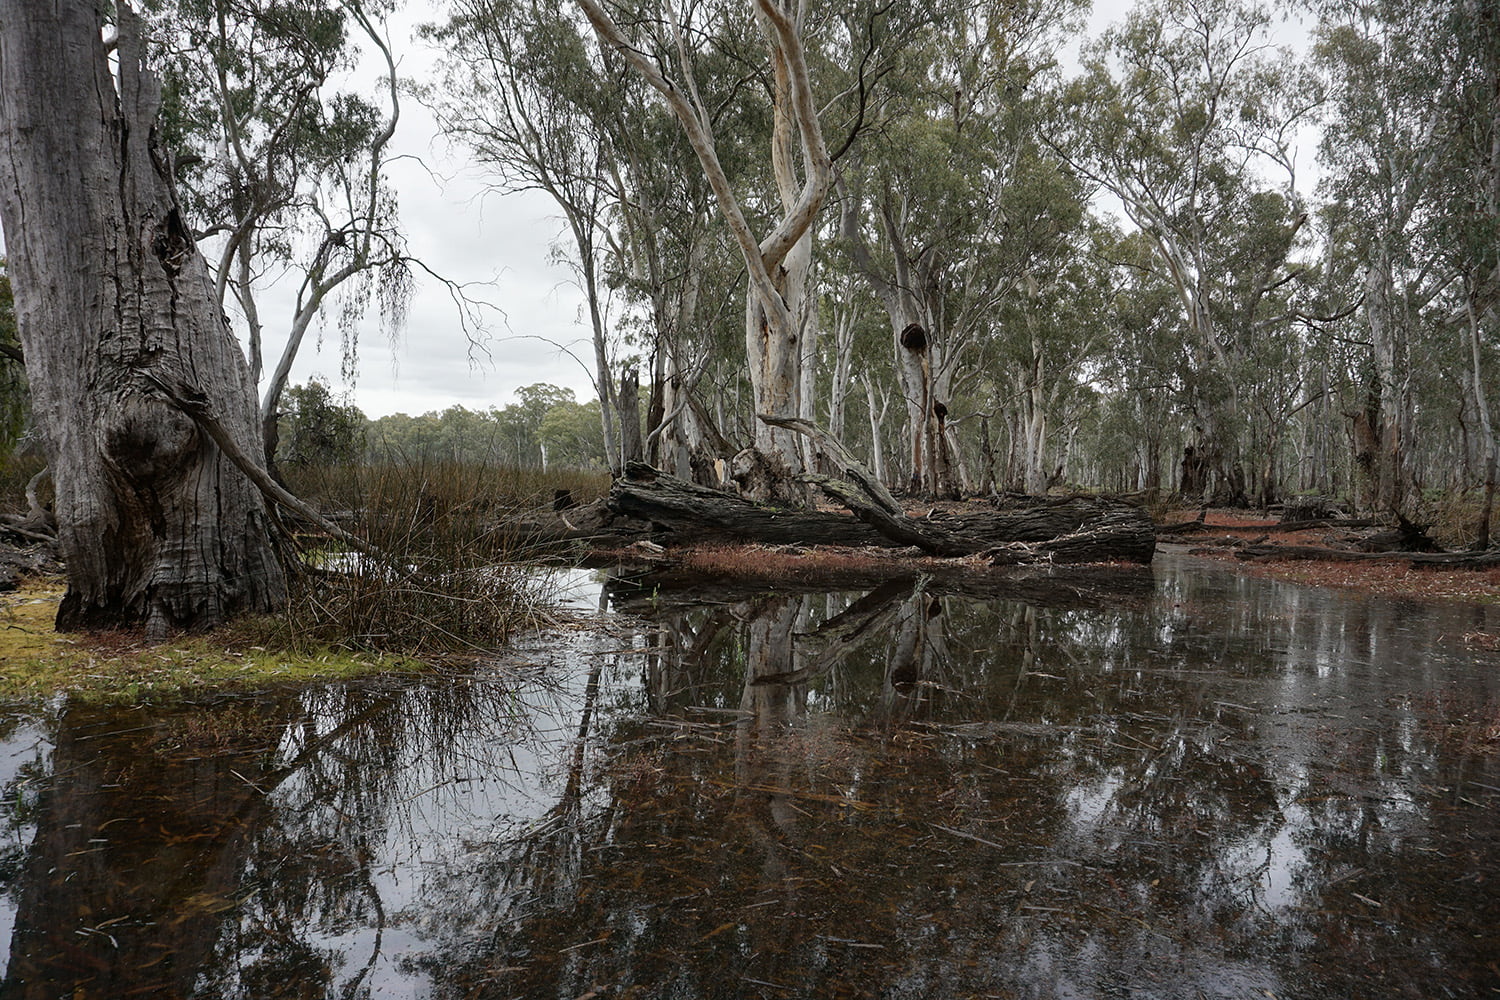 Gunbower Forest, an important area for native fish breeding and recruitment. Photo credit: Amy Russell